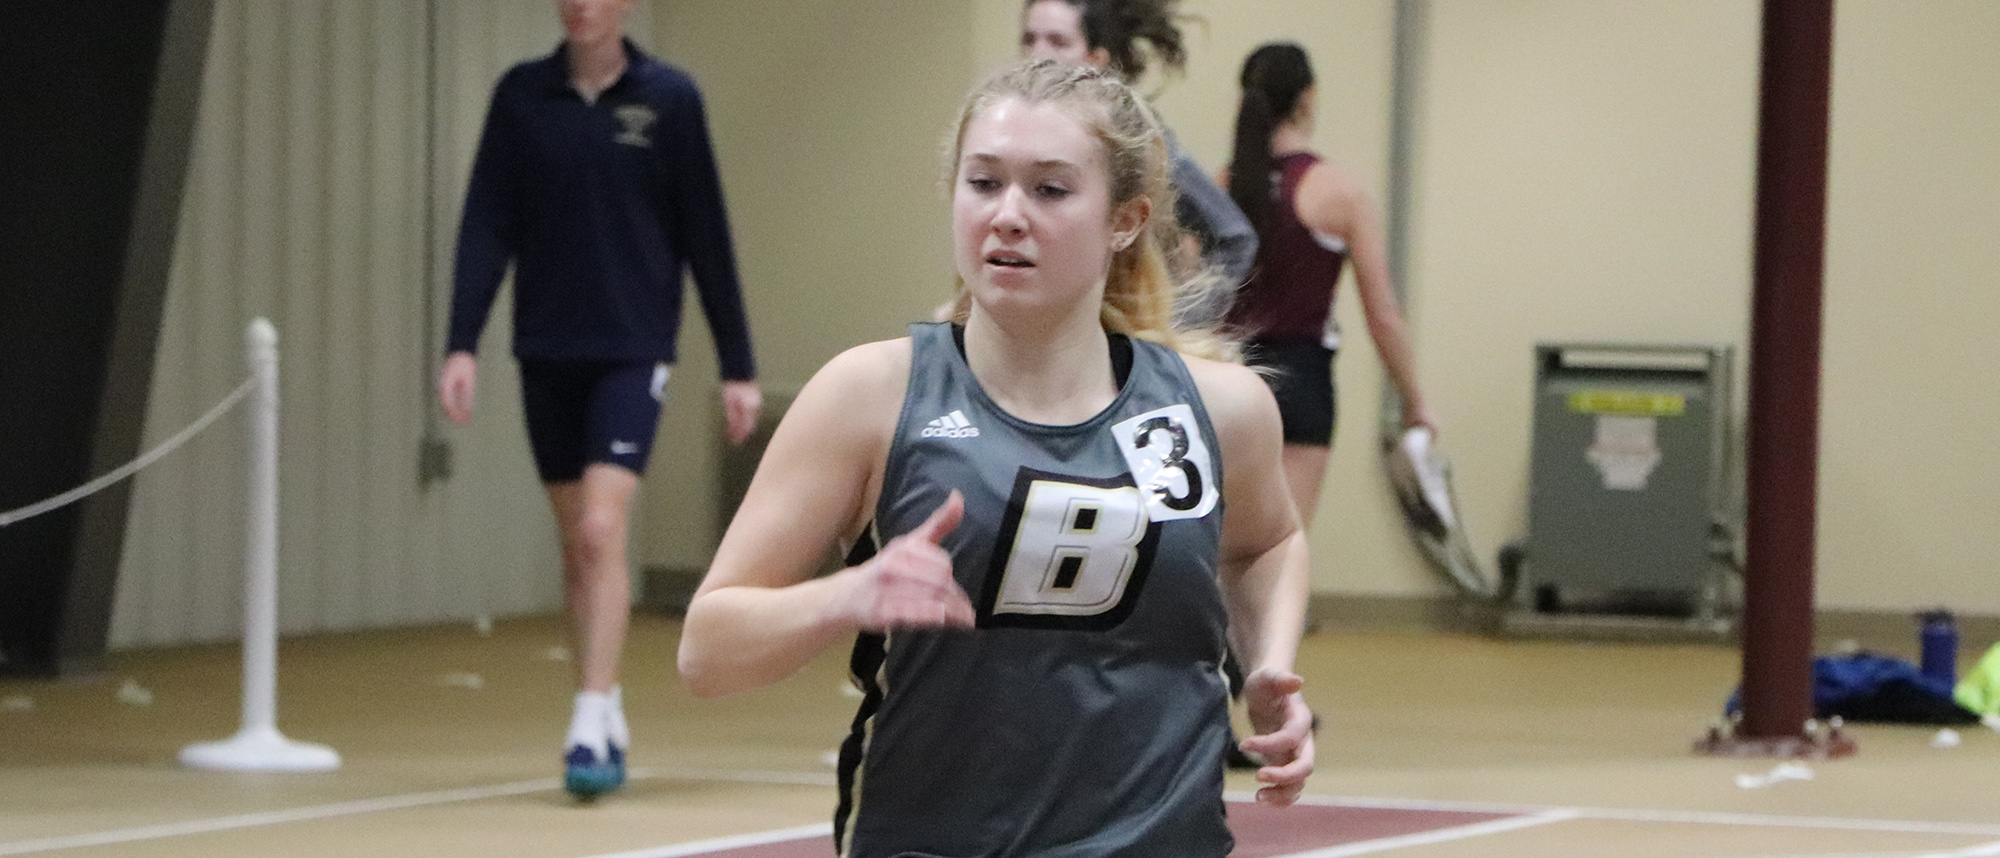 Bryant to compete at URI on Saturday